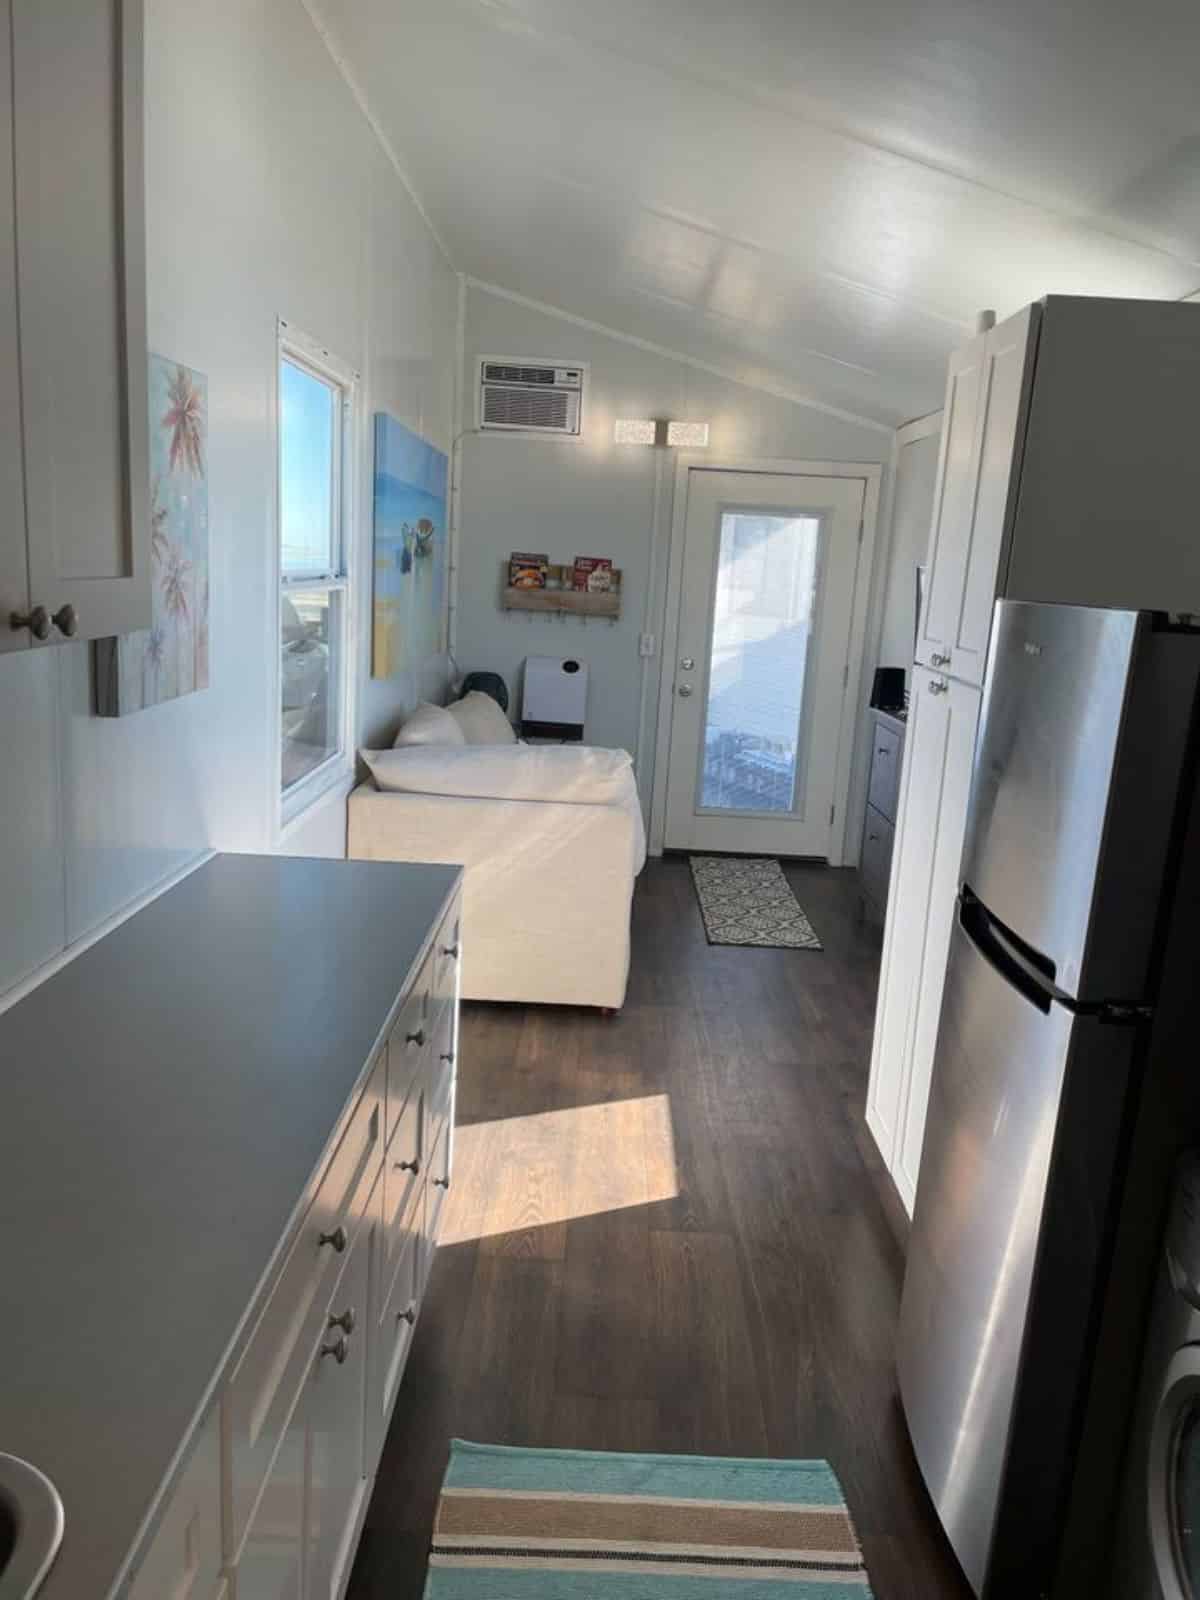 living area of tiny home on wheels